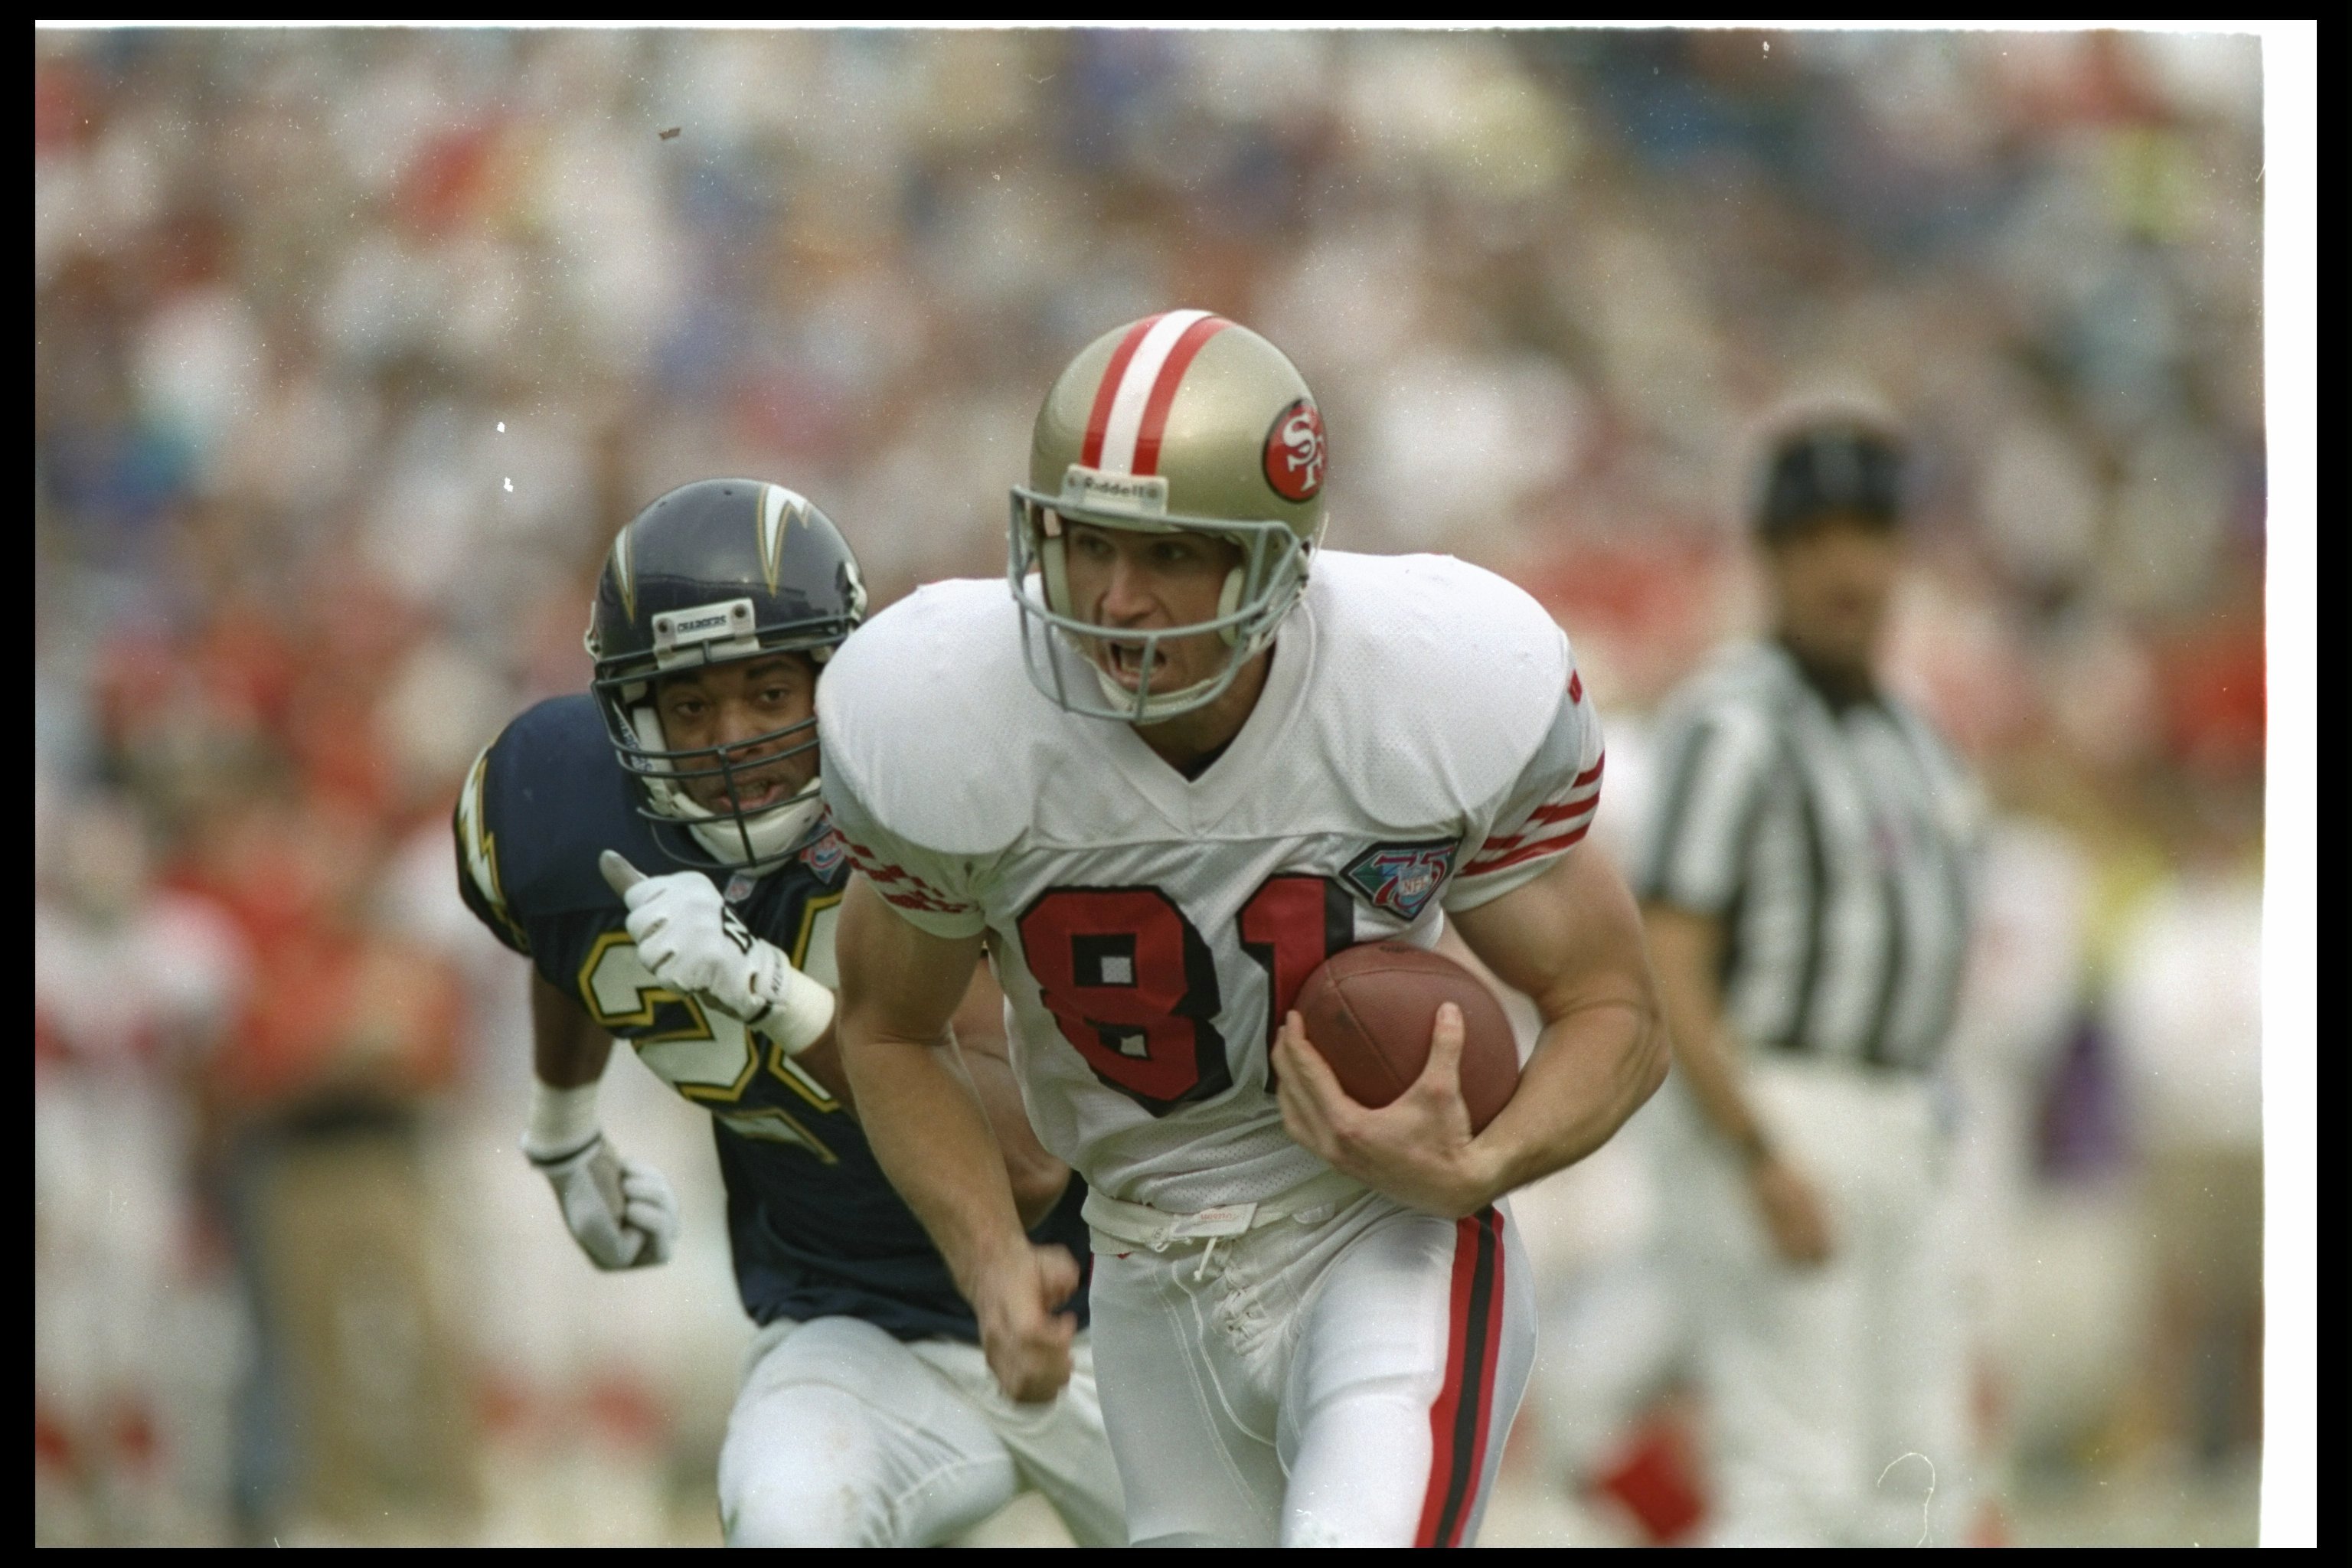 11 Dec 1994: Wide receiver Ed McCaffrey of the San Francisco 49ers moves the ball during a game against the San Diego Chargers at Jack Murphy Stadium in San Diego, California. The 49ers won the game, 38-15.